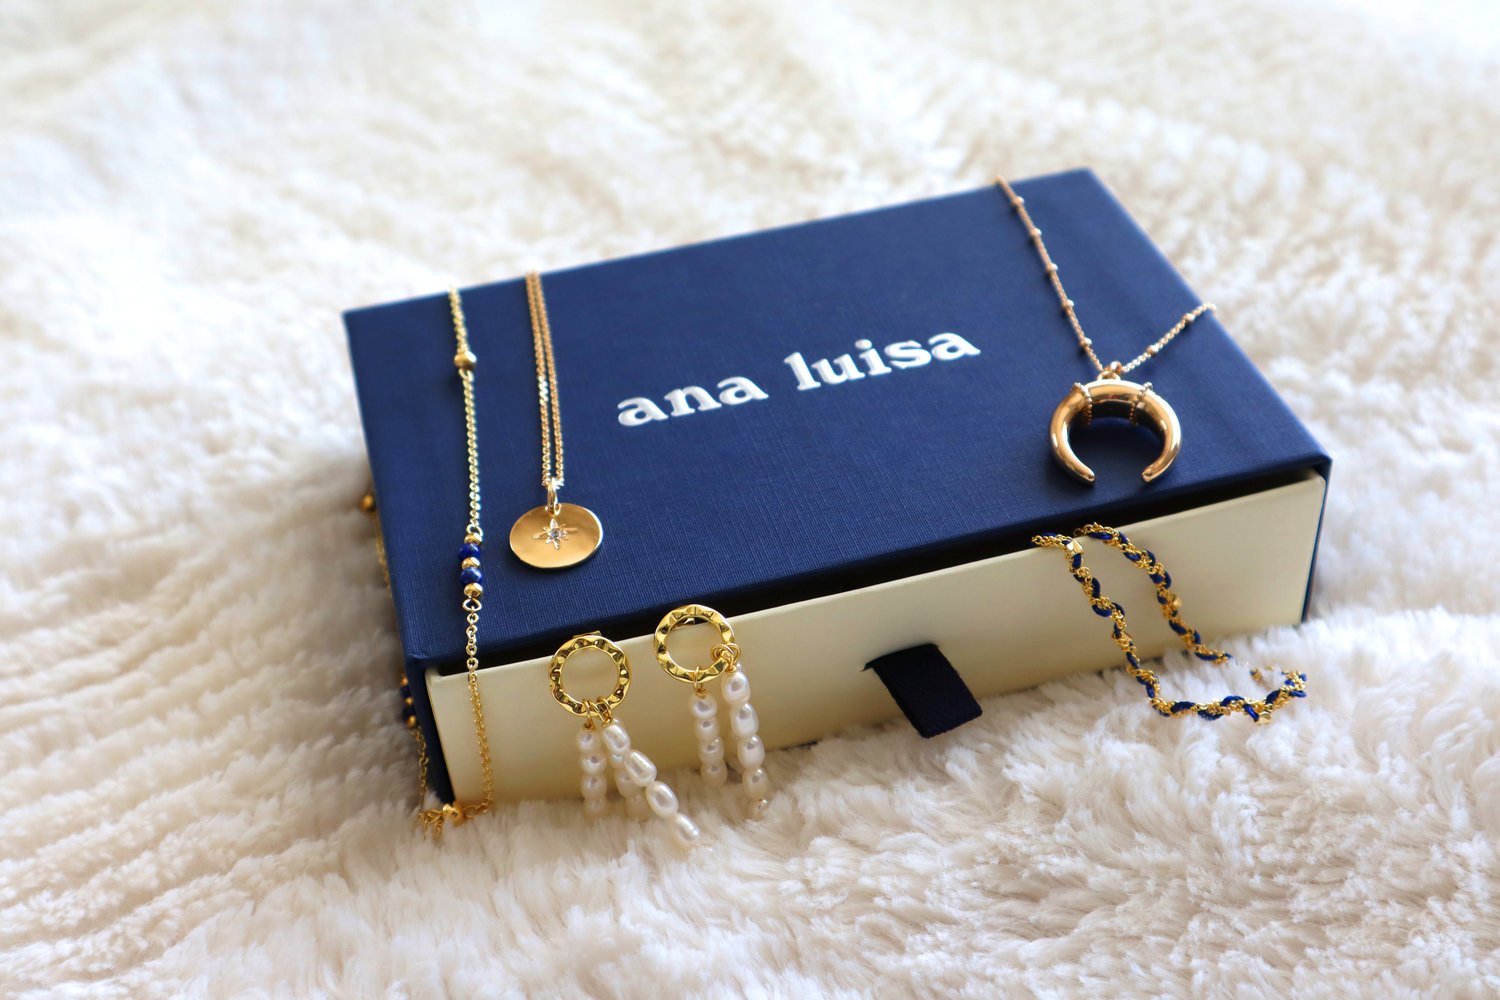 Step into Elegance: Ana Luisa's Grand Opening of Their Flagship Retail Store